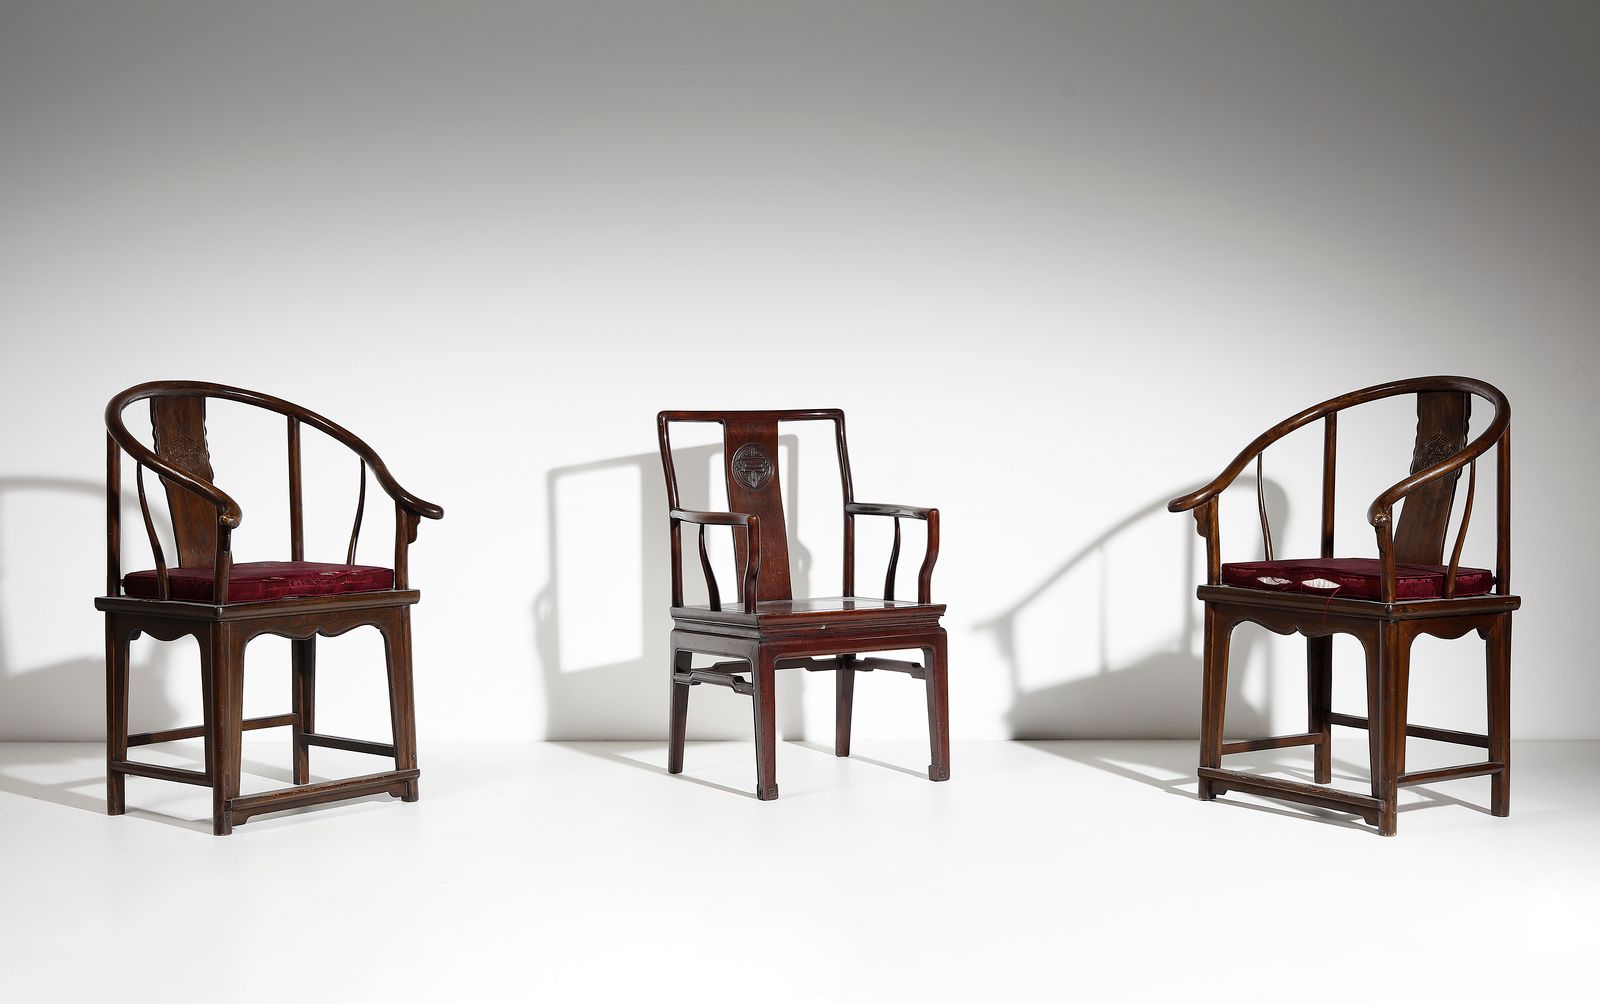 Chinese Art A group of three wooden armchairs Arte cinese. Gruppo di tre poltron&hellip;